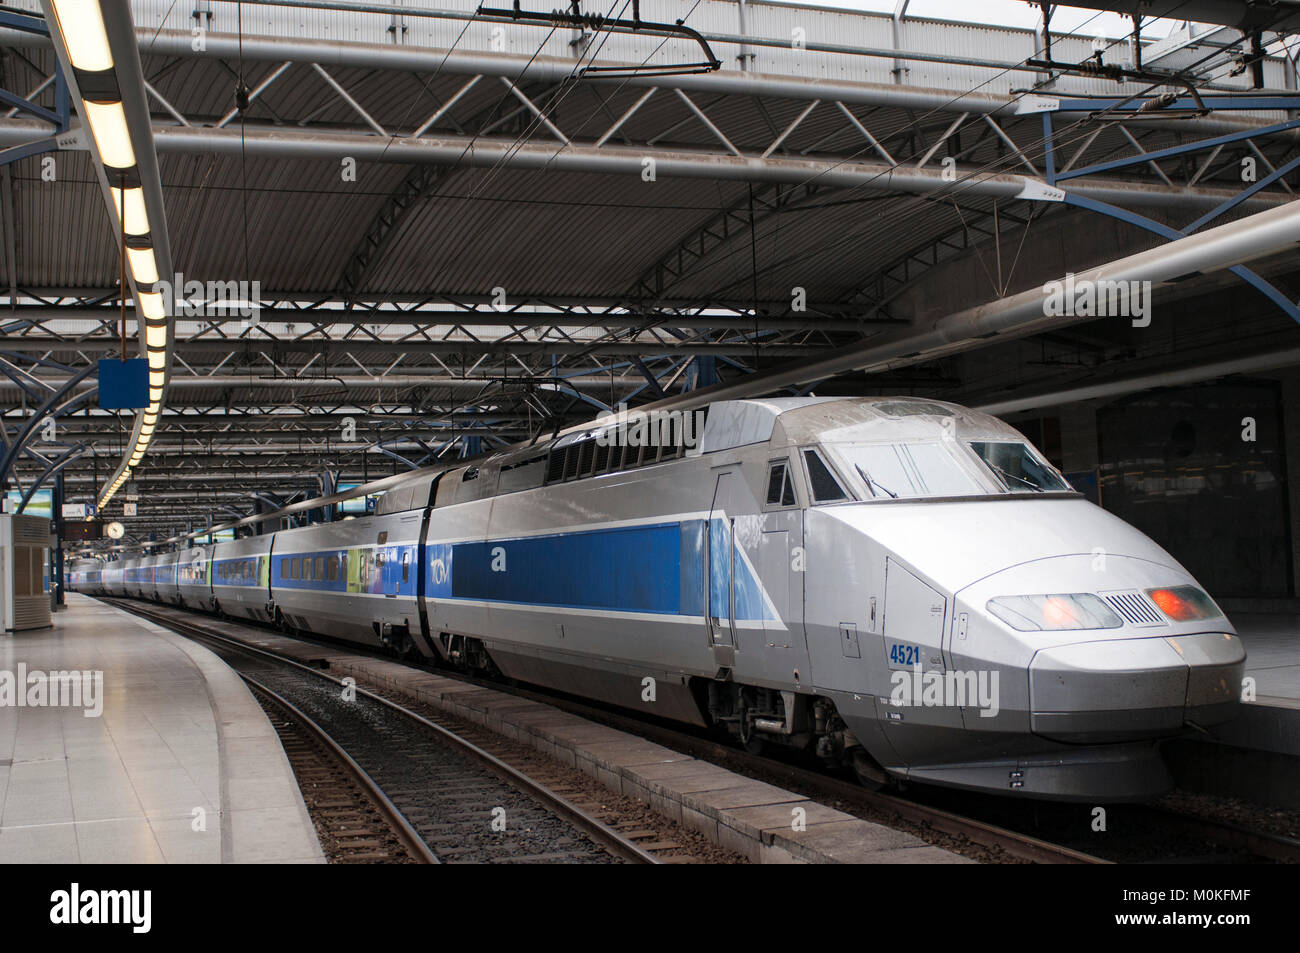 SNCF high speed train at Brussels station Belgium Stock Photo - Alamy